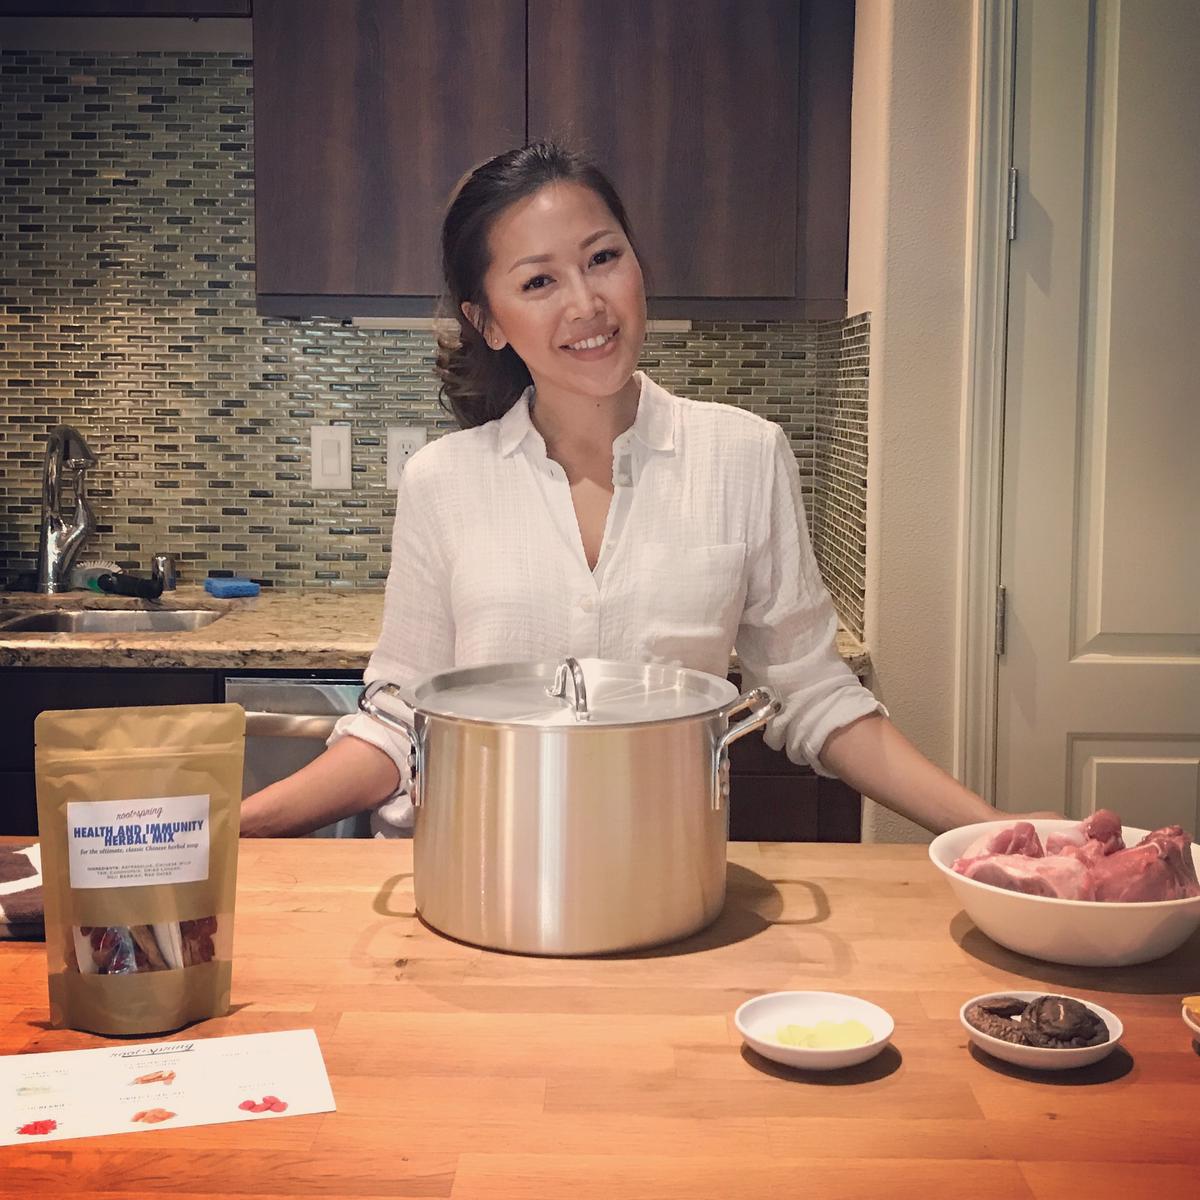 Cindy Mai in the kitchen. (Photo courtesy of root + spring).